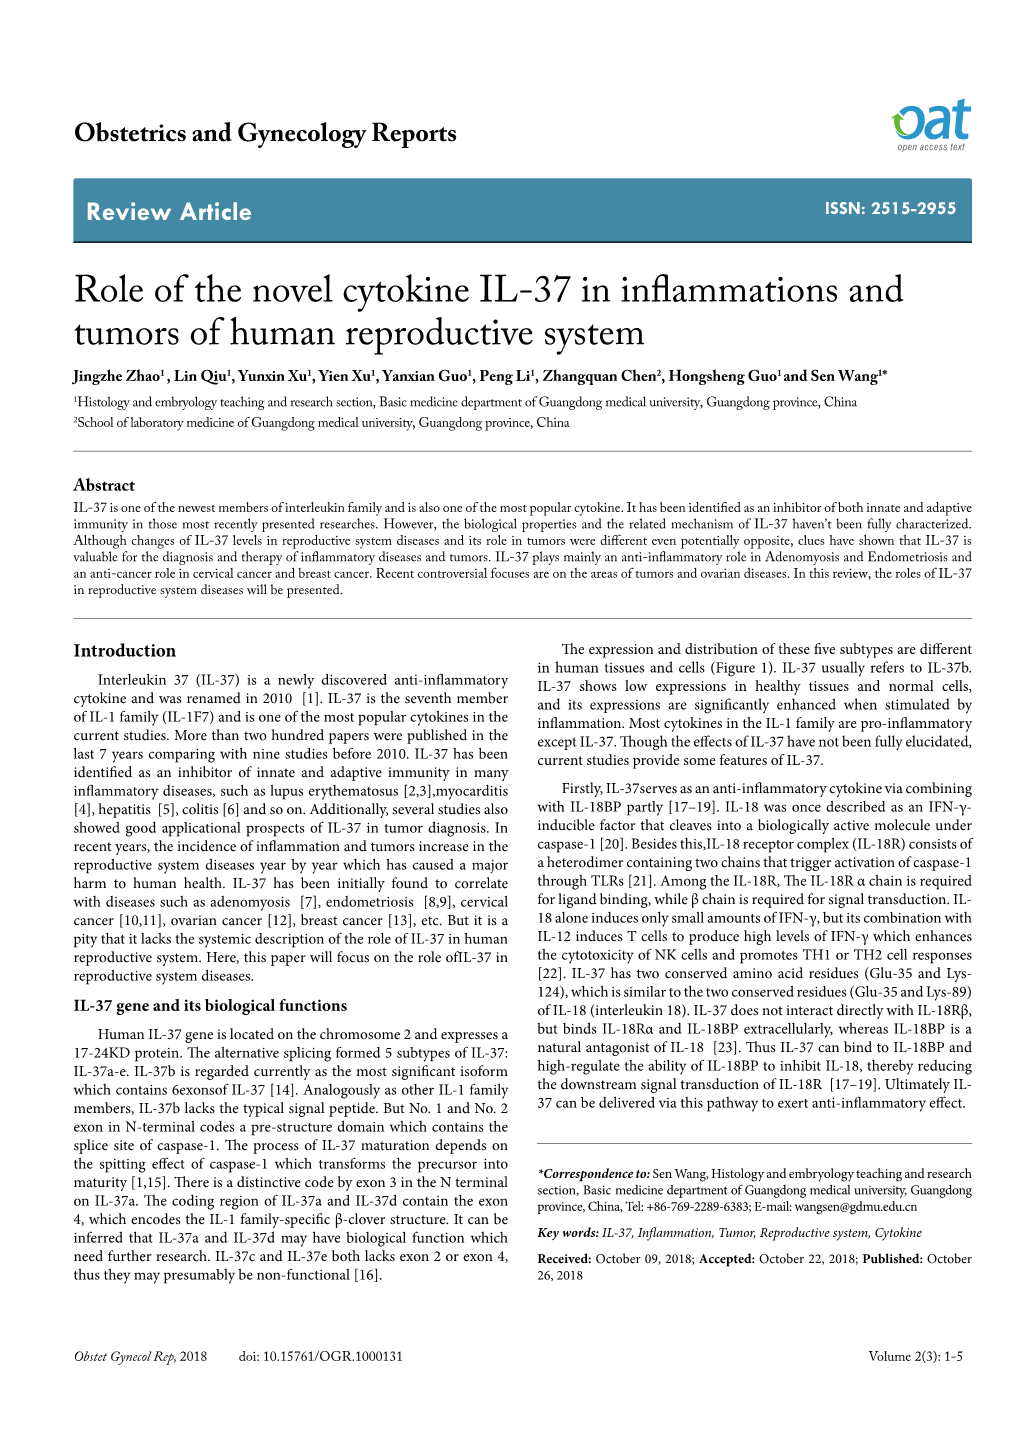 Role of the Novel Cytokine IL-37 in Inflammations and Tumors of Human